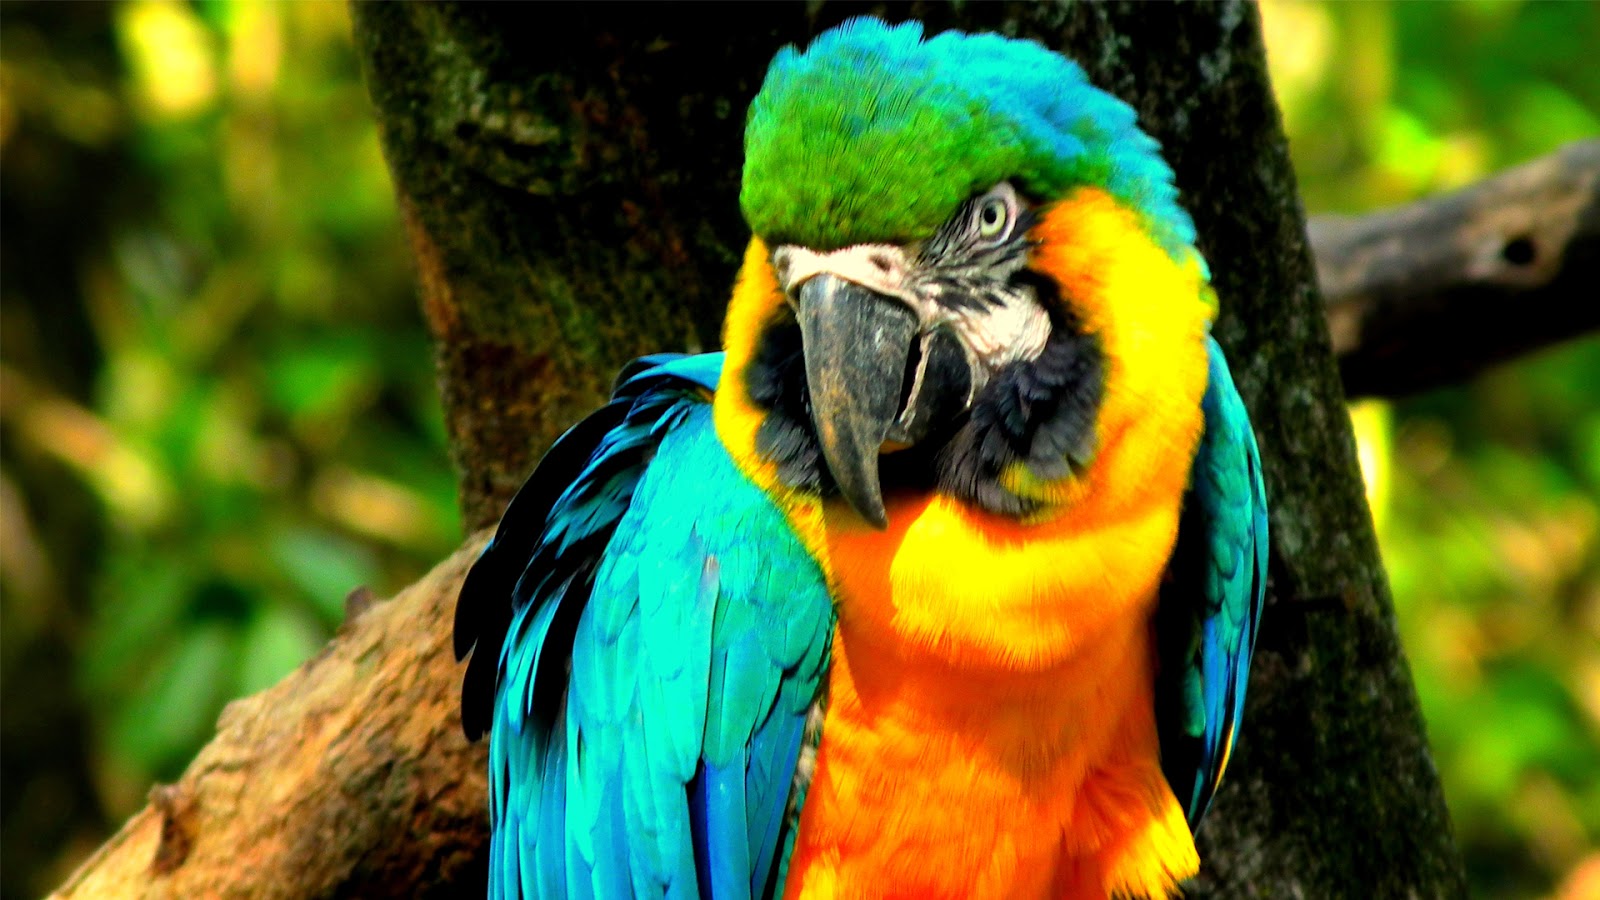 most colorful bird macaw parrot image download